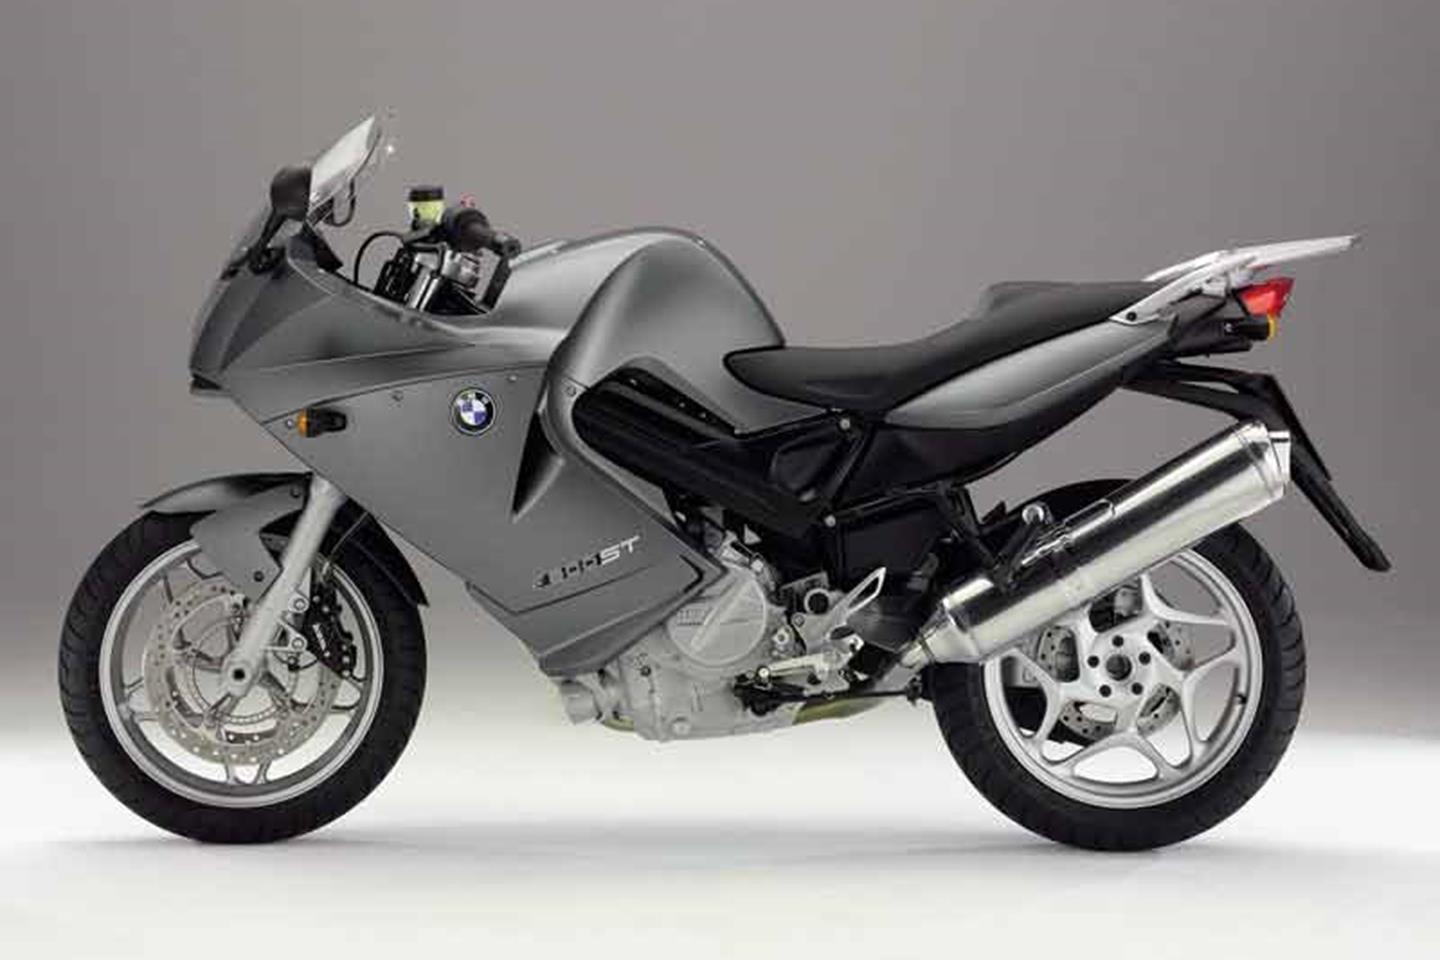 BMW F800S (2006-2010) Review | Speed, Specs & Prices